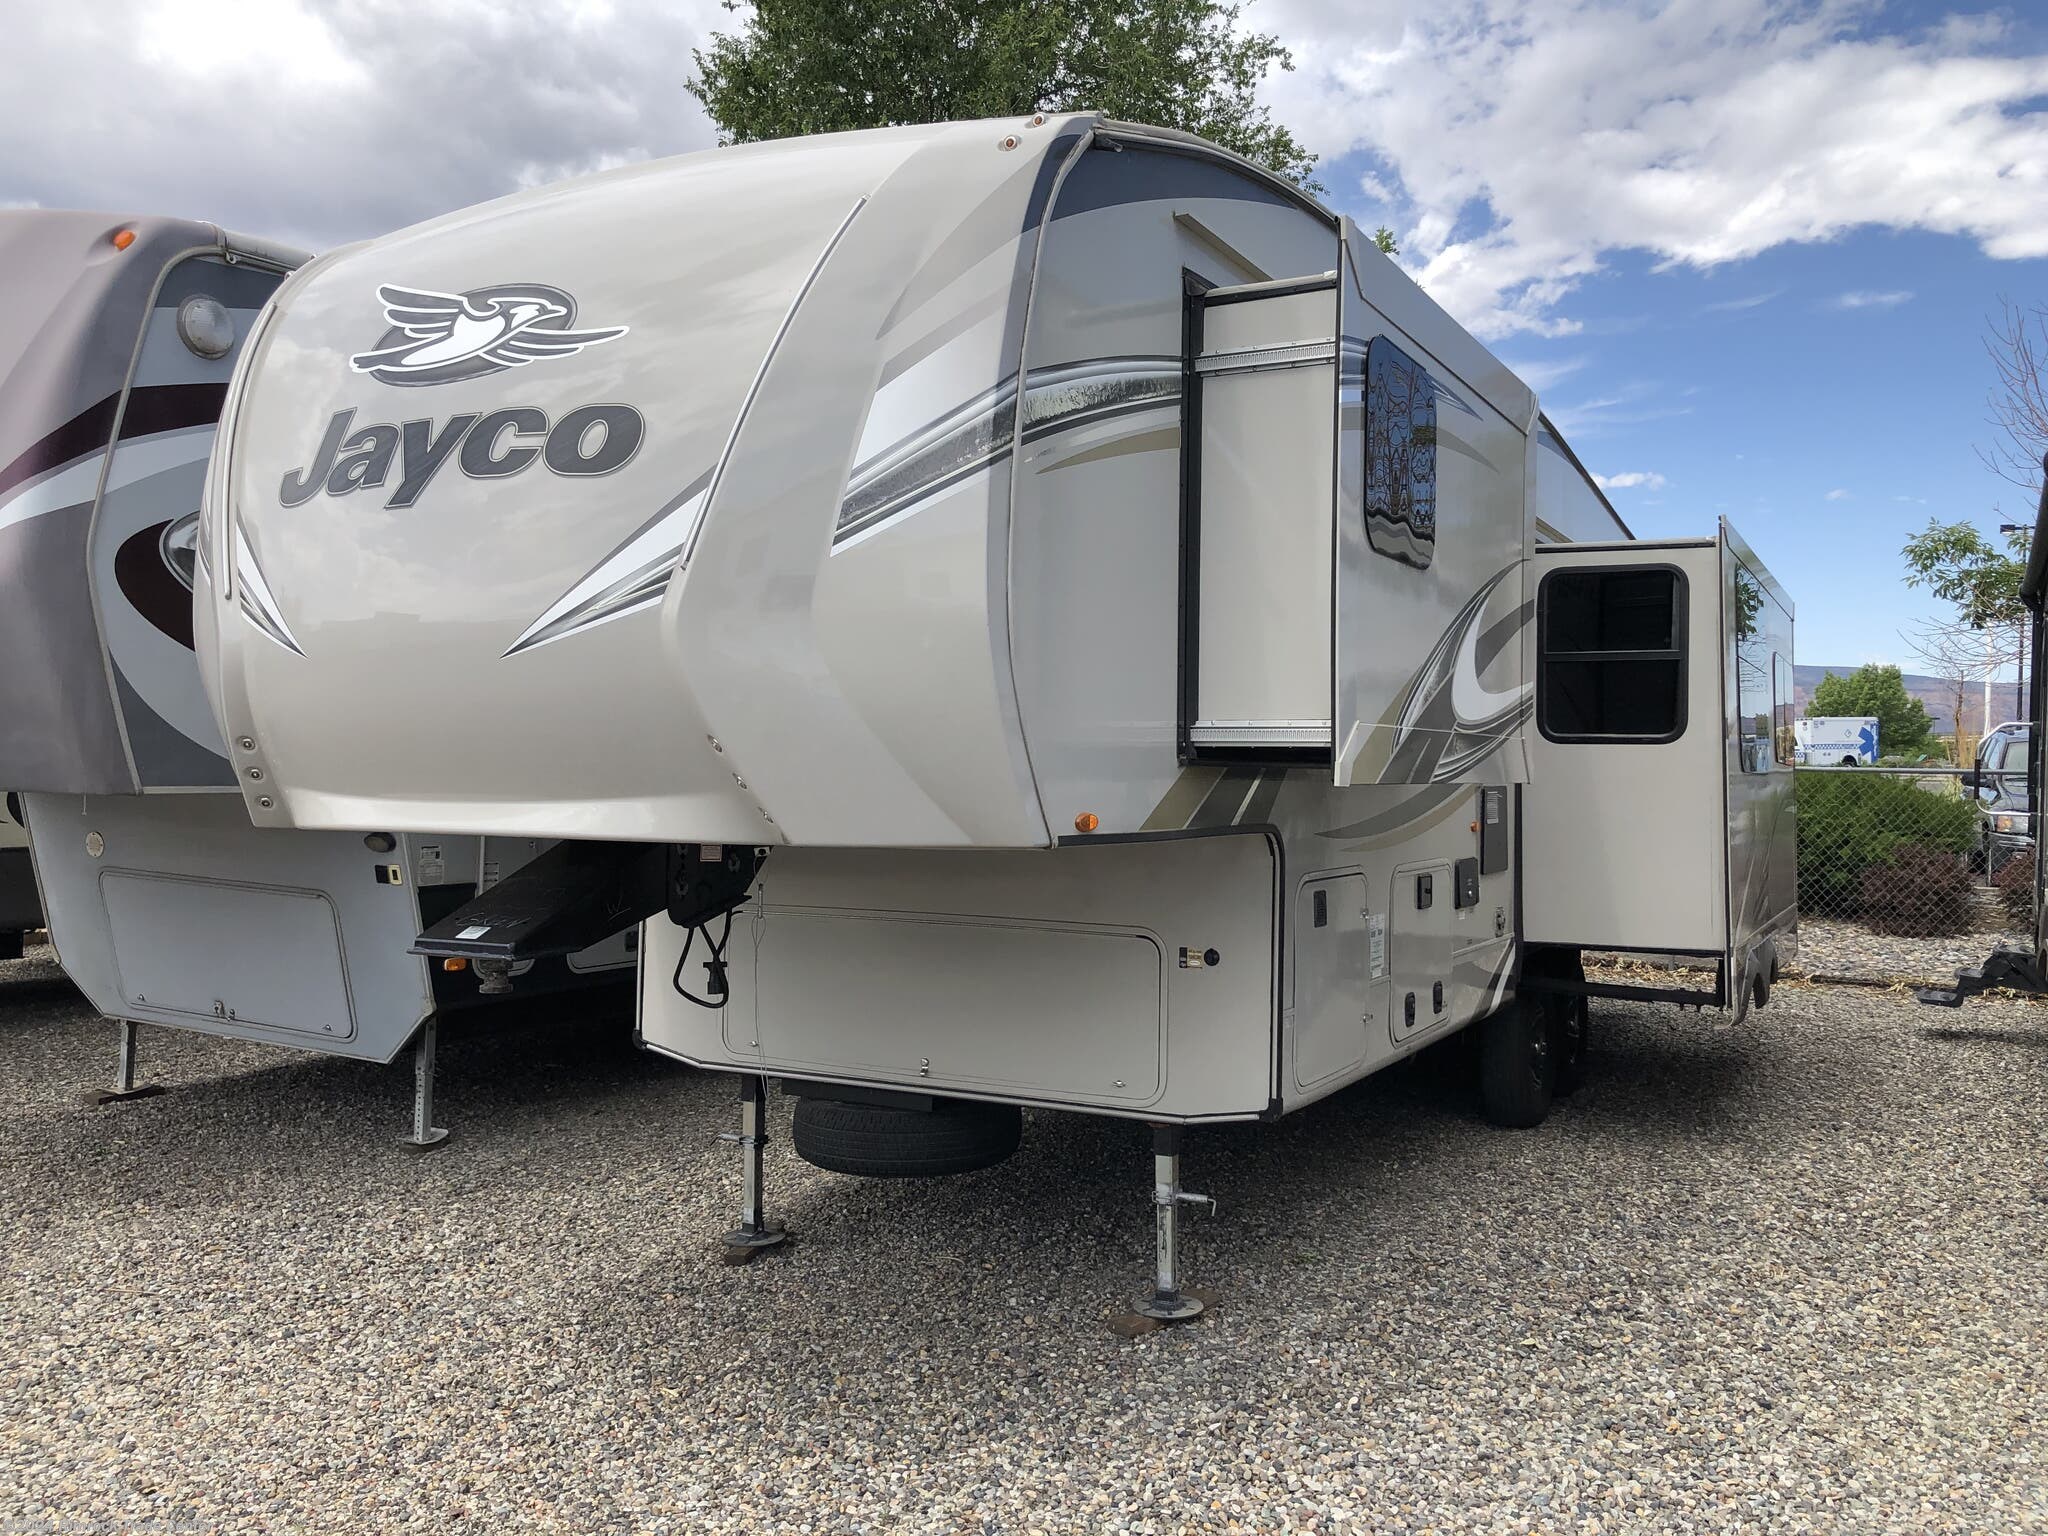 2018 Jayco Eagle Fifth Wheels 28.5 RV for Sale in Grand Junction, CO 2018 Jayco 5th Wheel Eagle Ht 28.5 Rsts